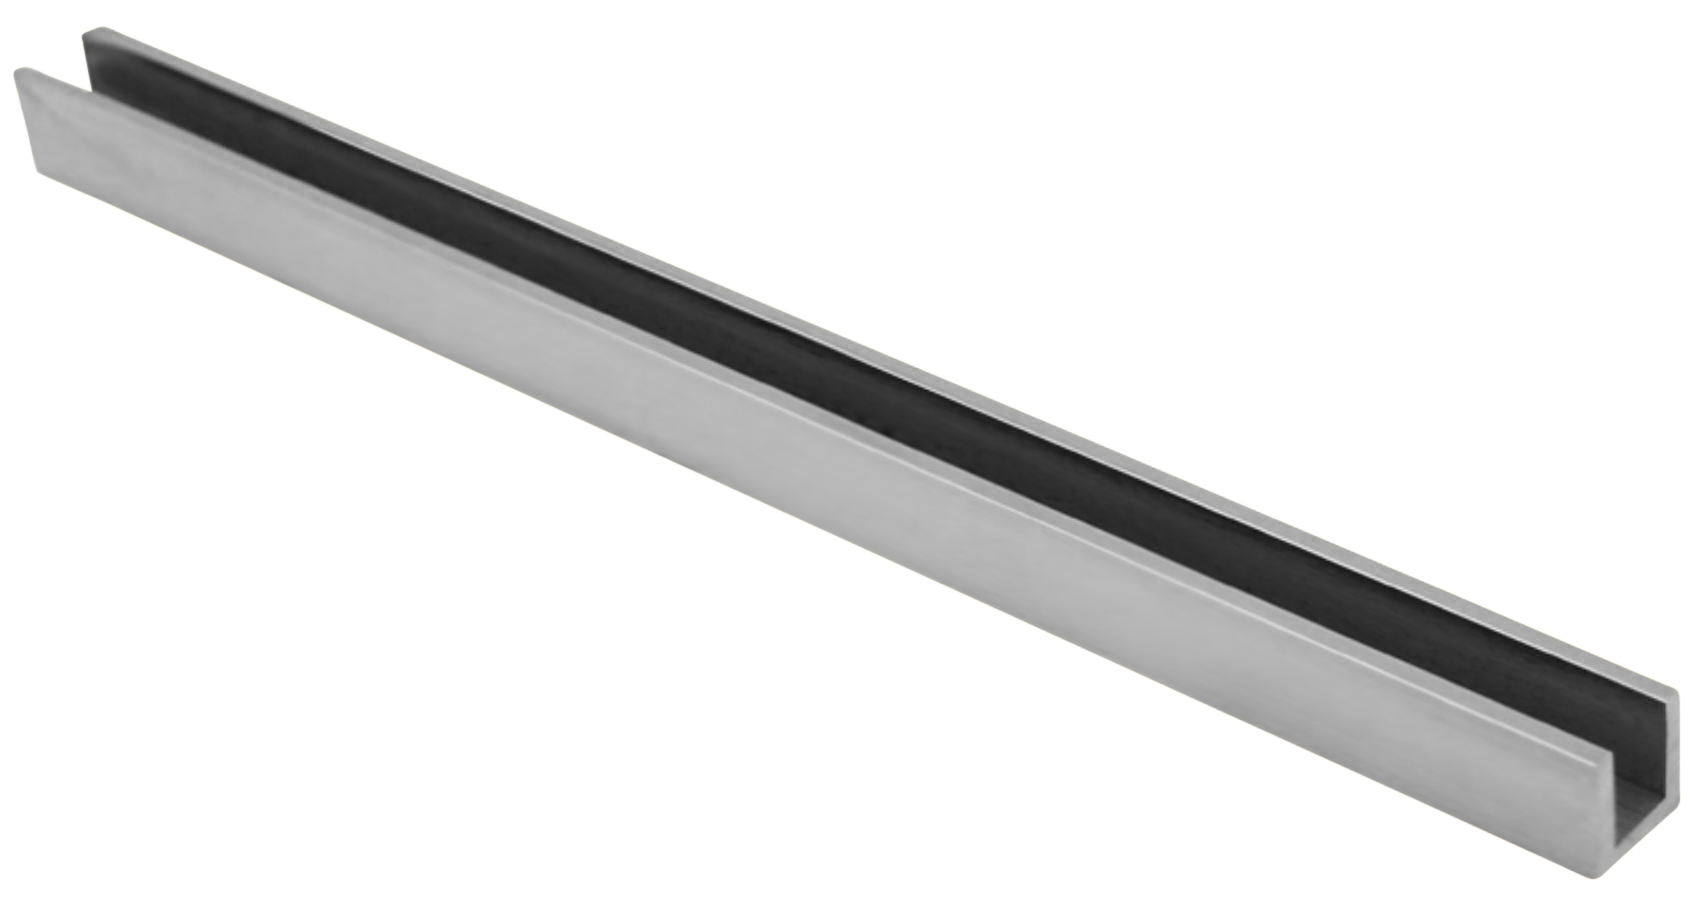 Flat back u-channel with 1/2" opening - 95" long - All finishes Polished Stainless Steel